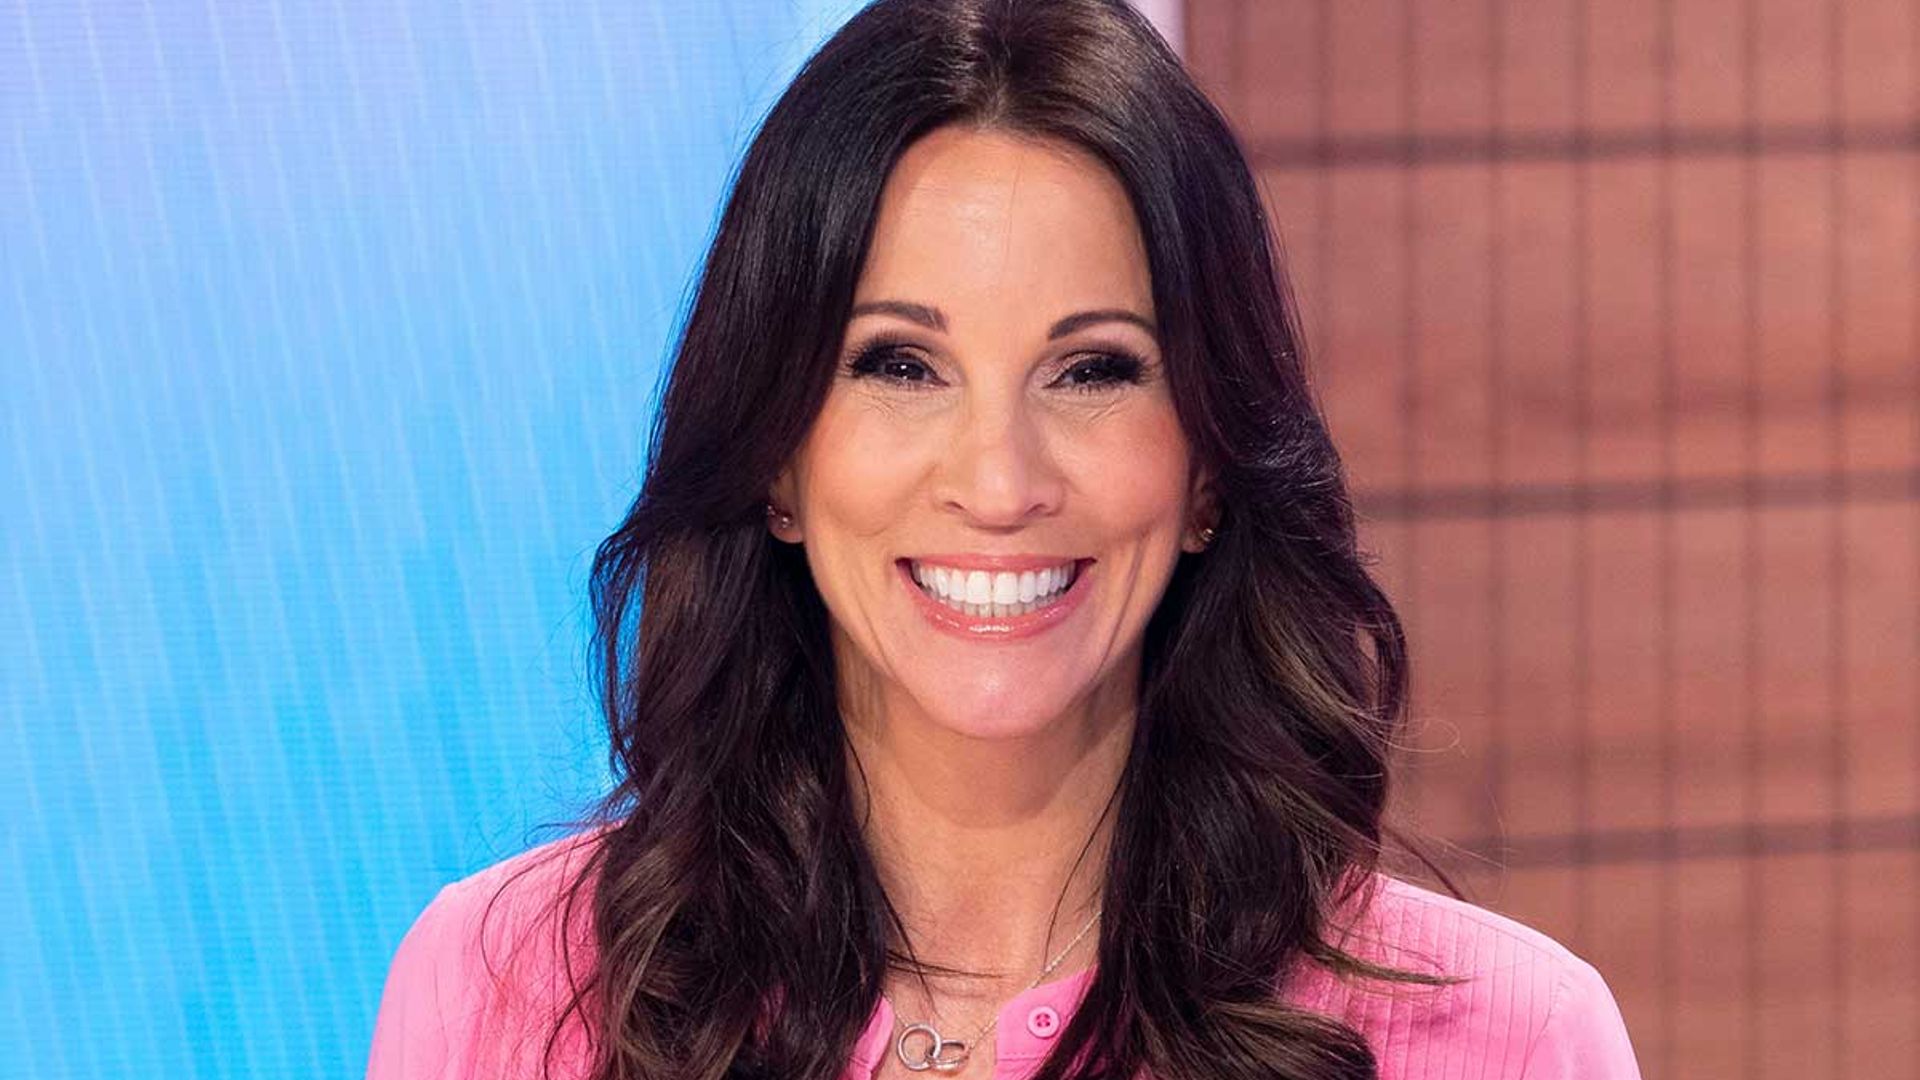 Andrea McLean's hot pink Zara skirt is cheap, cheerful and oh-so-chic